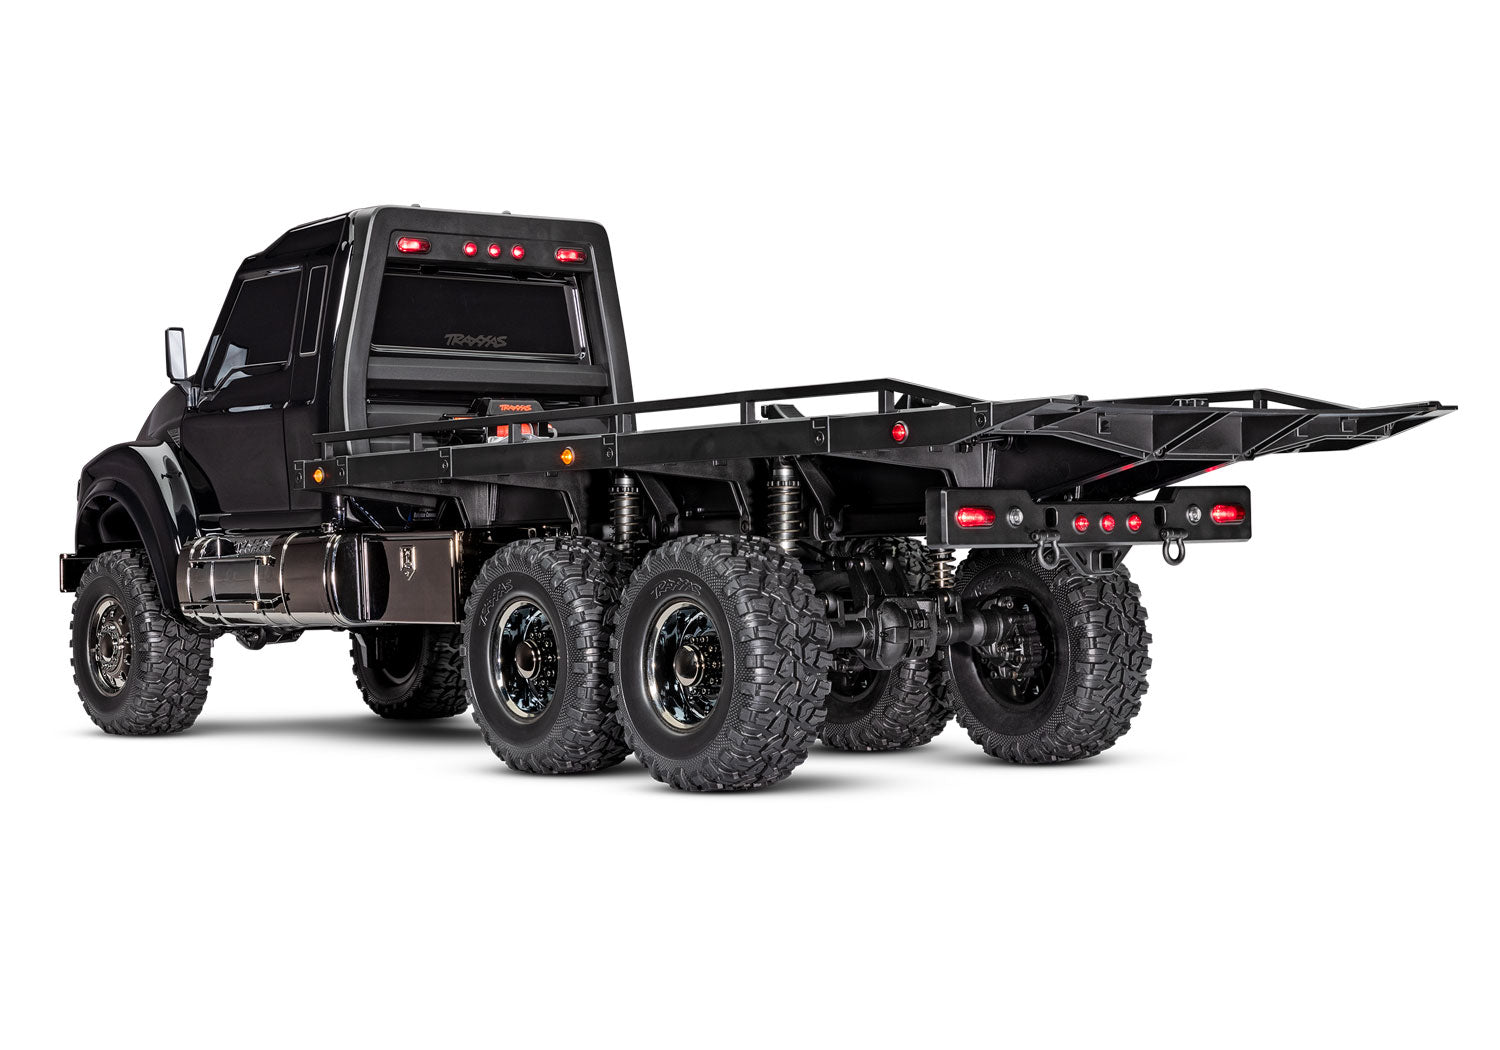 BLACK TRX-6® Ultimate RC Hauler: 6X6 Electric Flatbed Truck with TQi™ Traxxas Link™ Enabled 2.4GHz Radio System